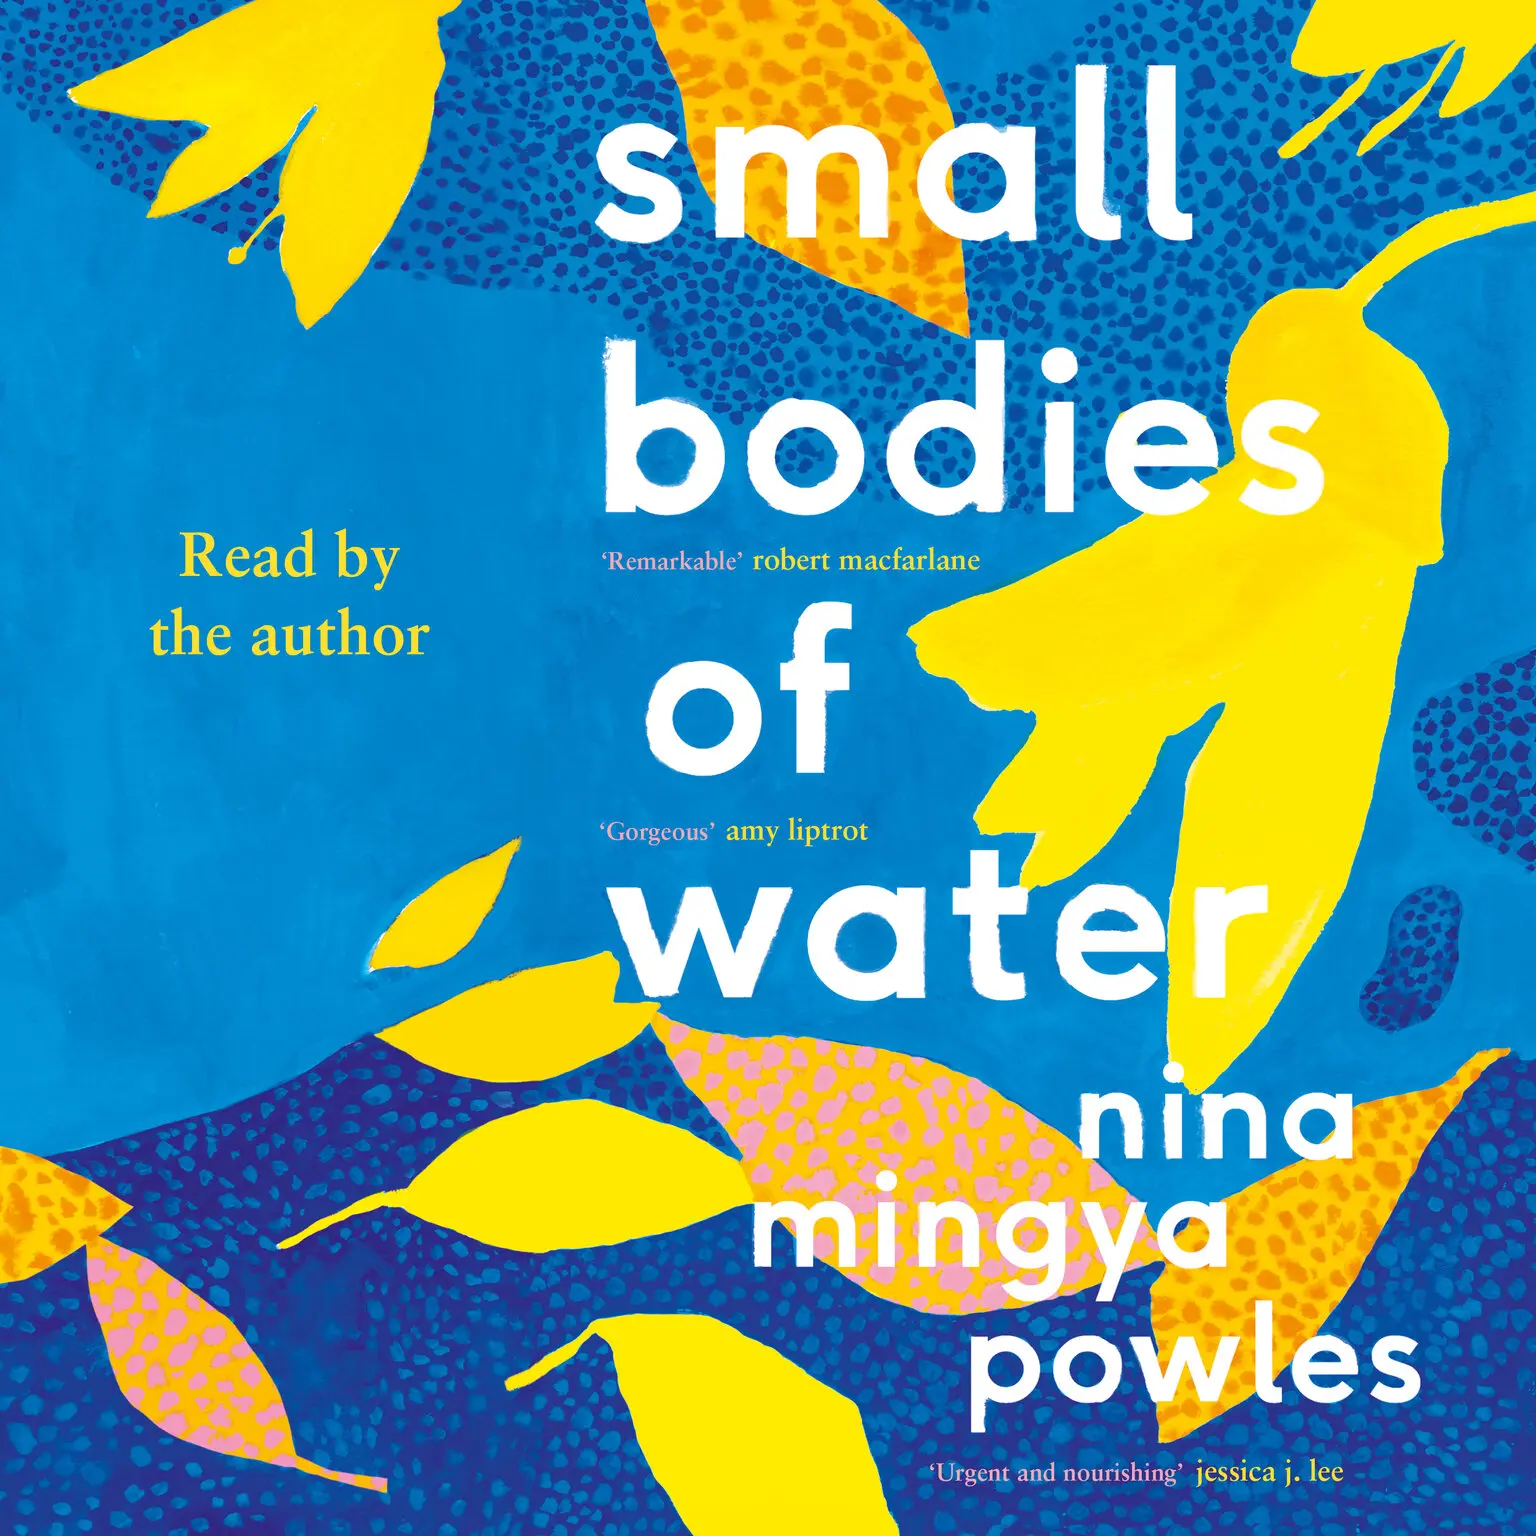 Small Bodies of Water (AudiobookFormat, 2021, Canongate Books)